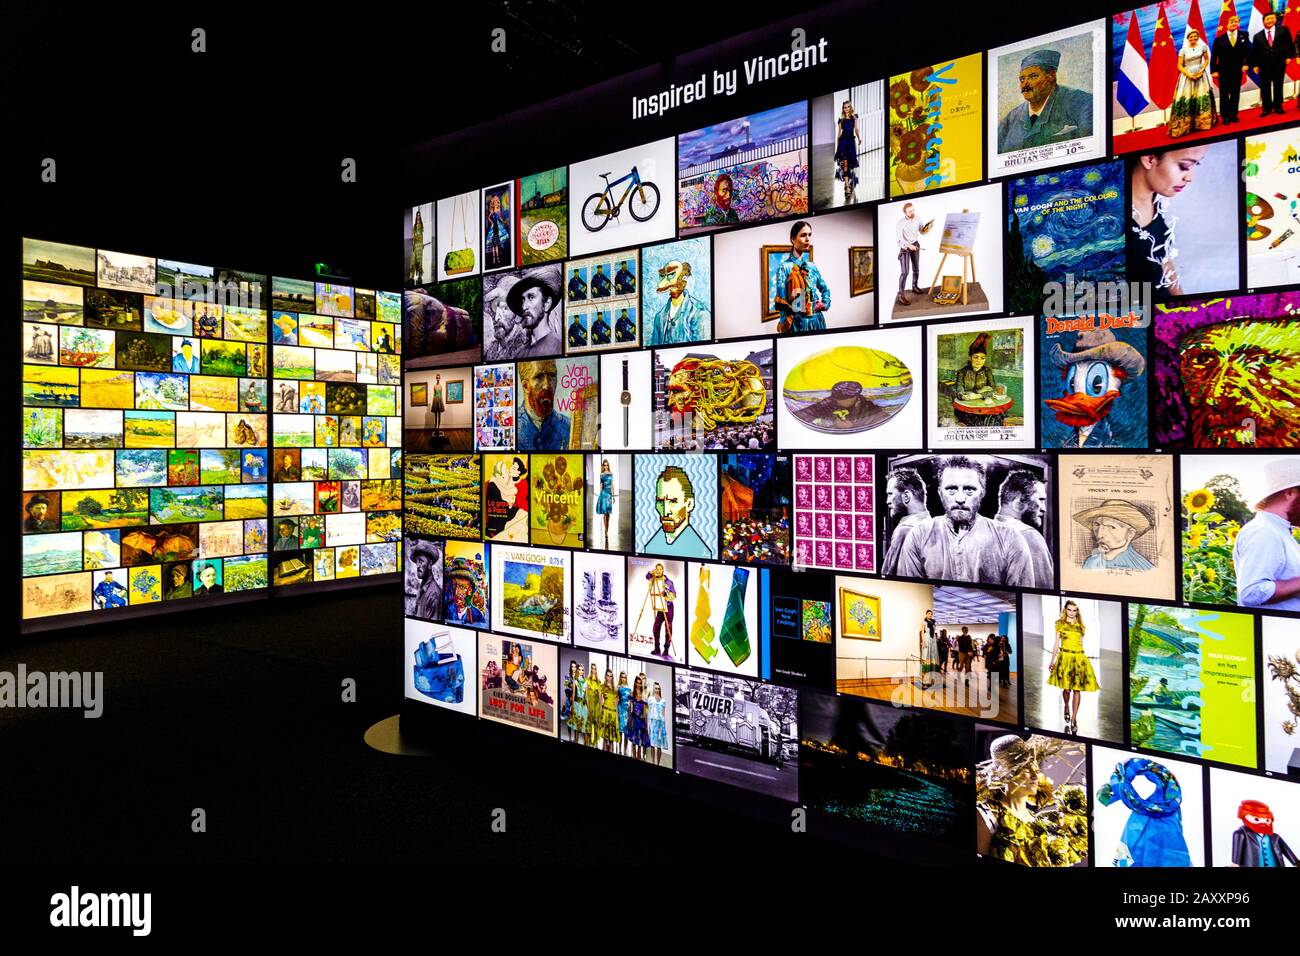 Walls displaying artwork inspired by Dutch painted Vincent Van Gogh at Meet Vincent van Gogh Experience 2020, London, UK Stock Photo